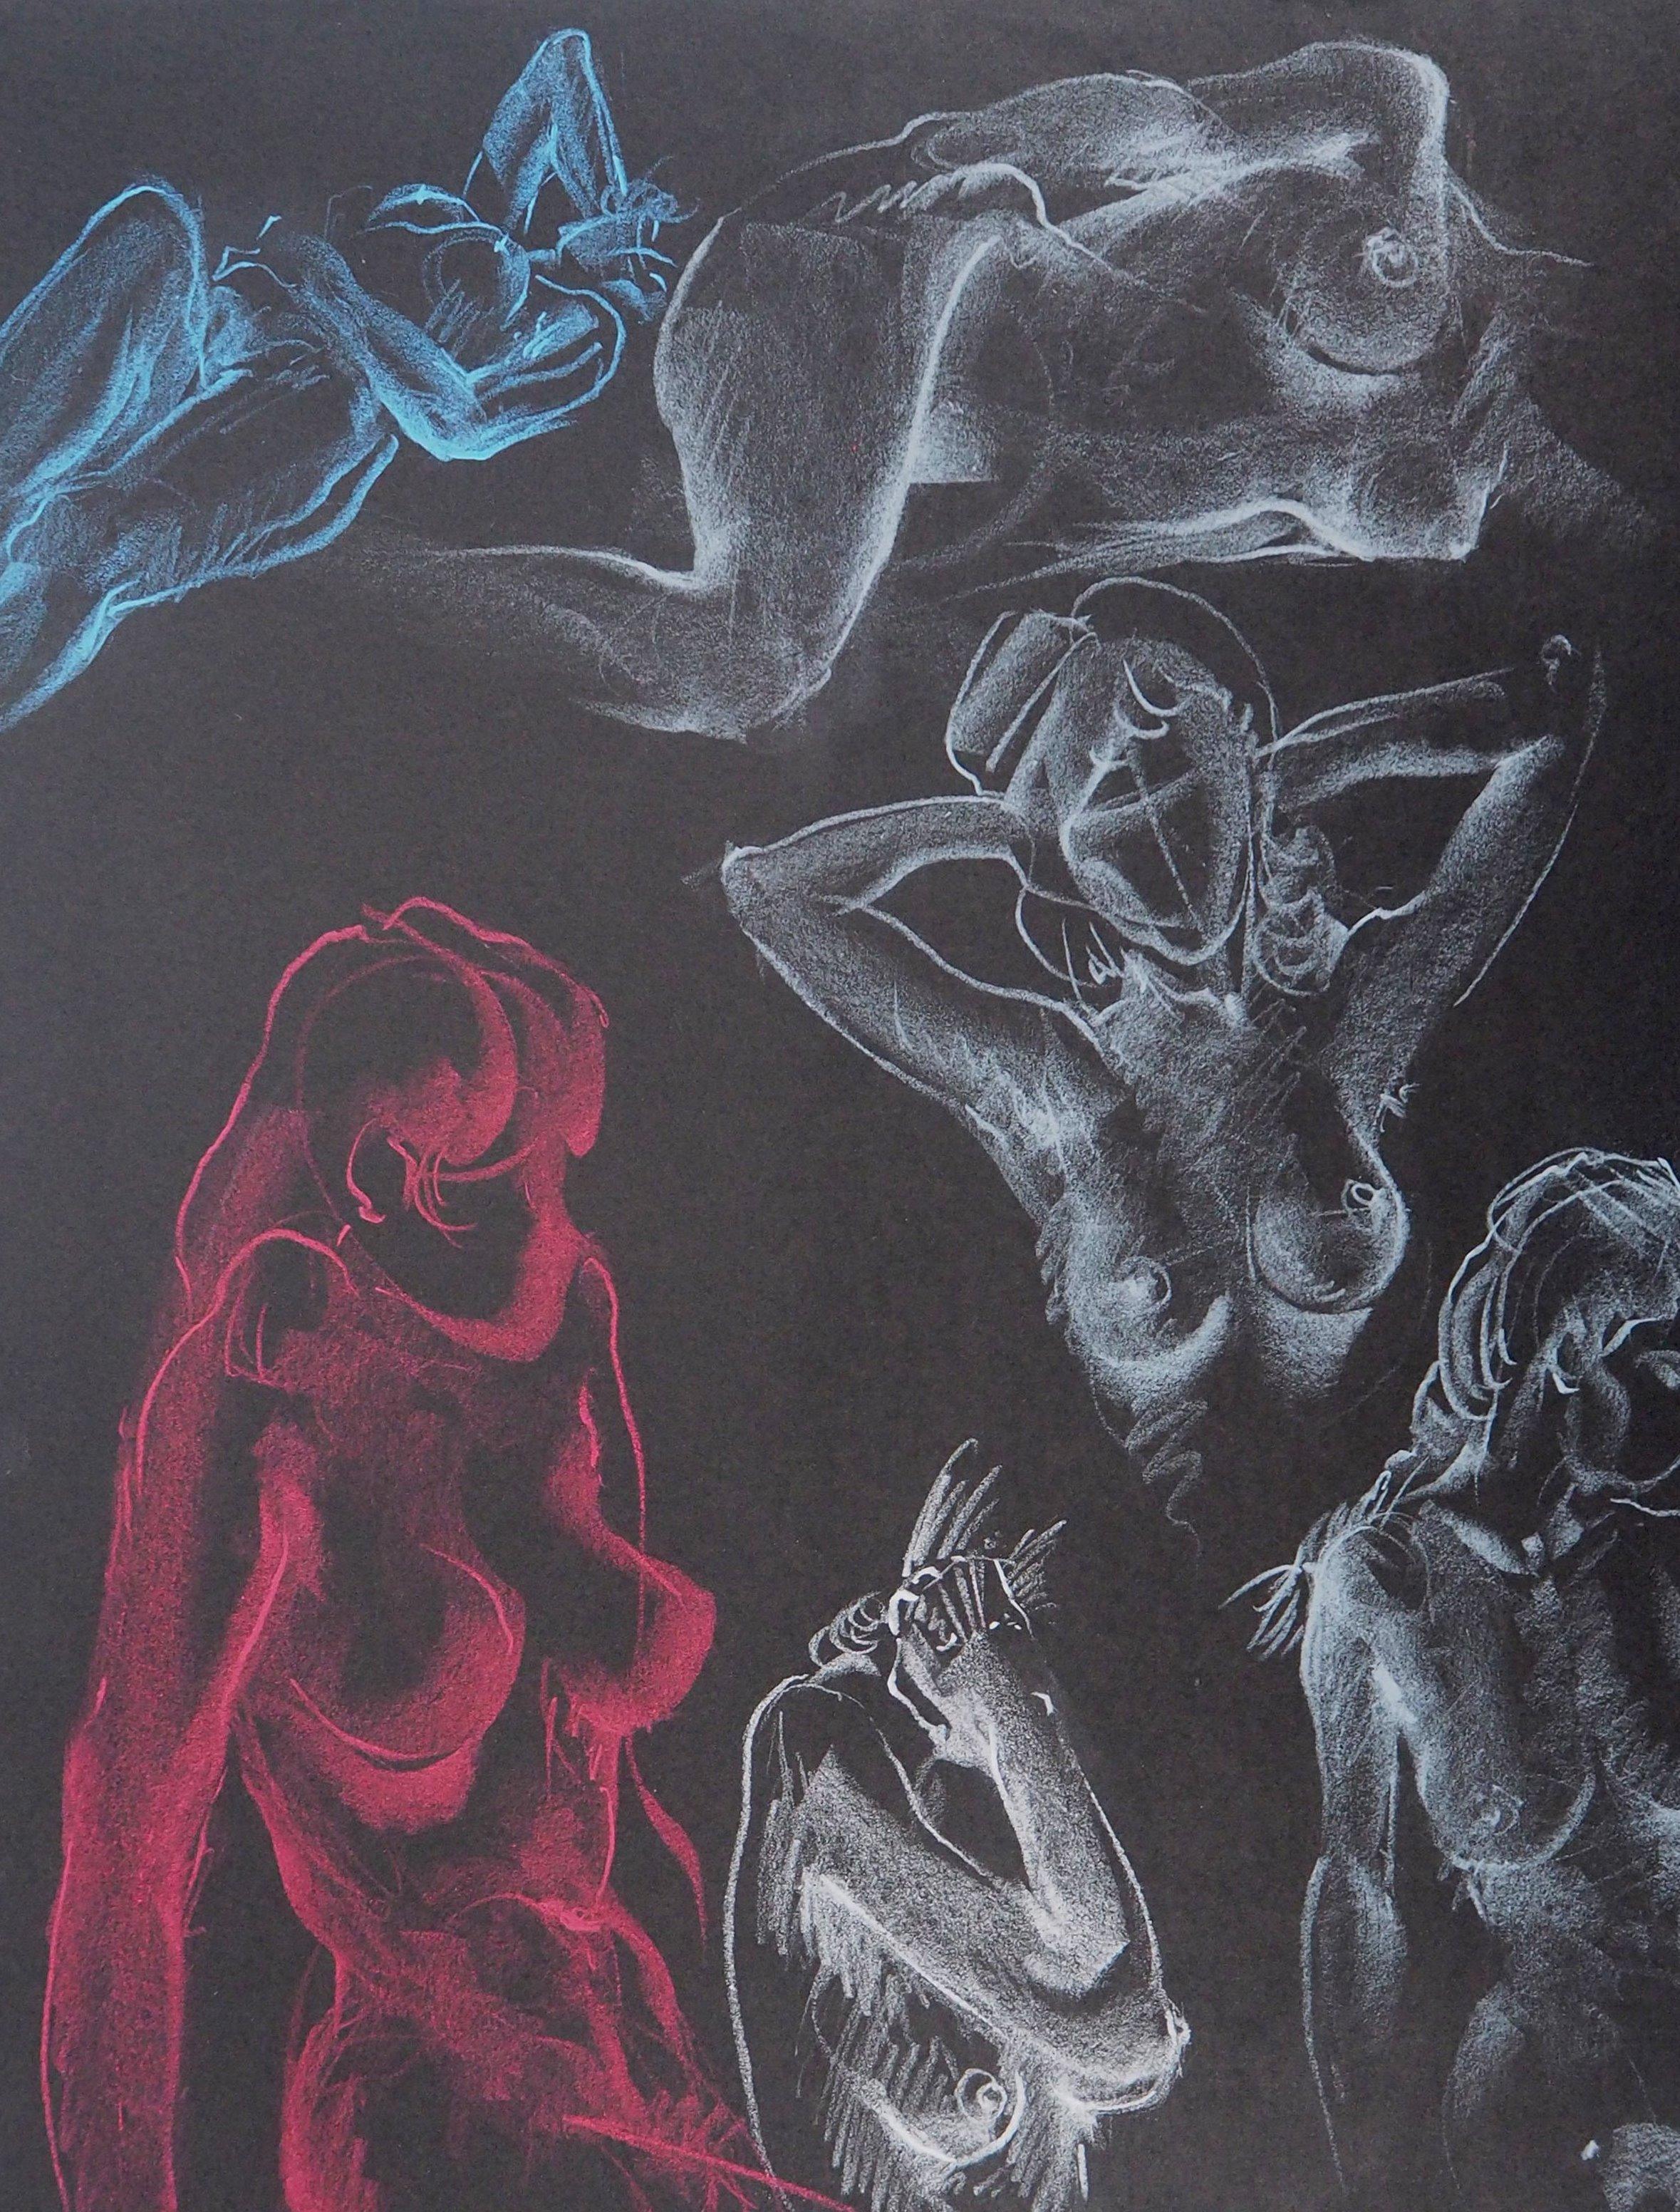 Gaston COPPENS (1909 - 2002)
The Awakening, Six Studies of Nude

Original charcoal drawing
Handsigned on the back of the sheet (see photo)
On black paper 65 x 50 cm (c. 25,5 x 19,6 inch)

Very good condition, a few small surface defects on the